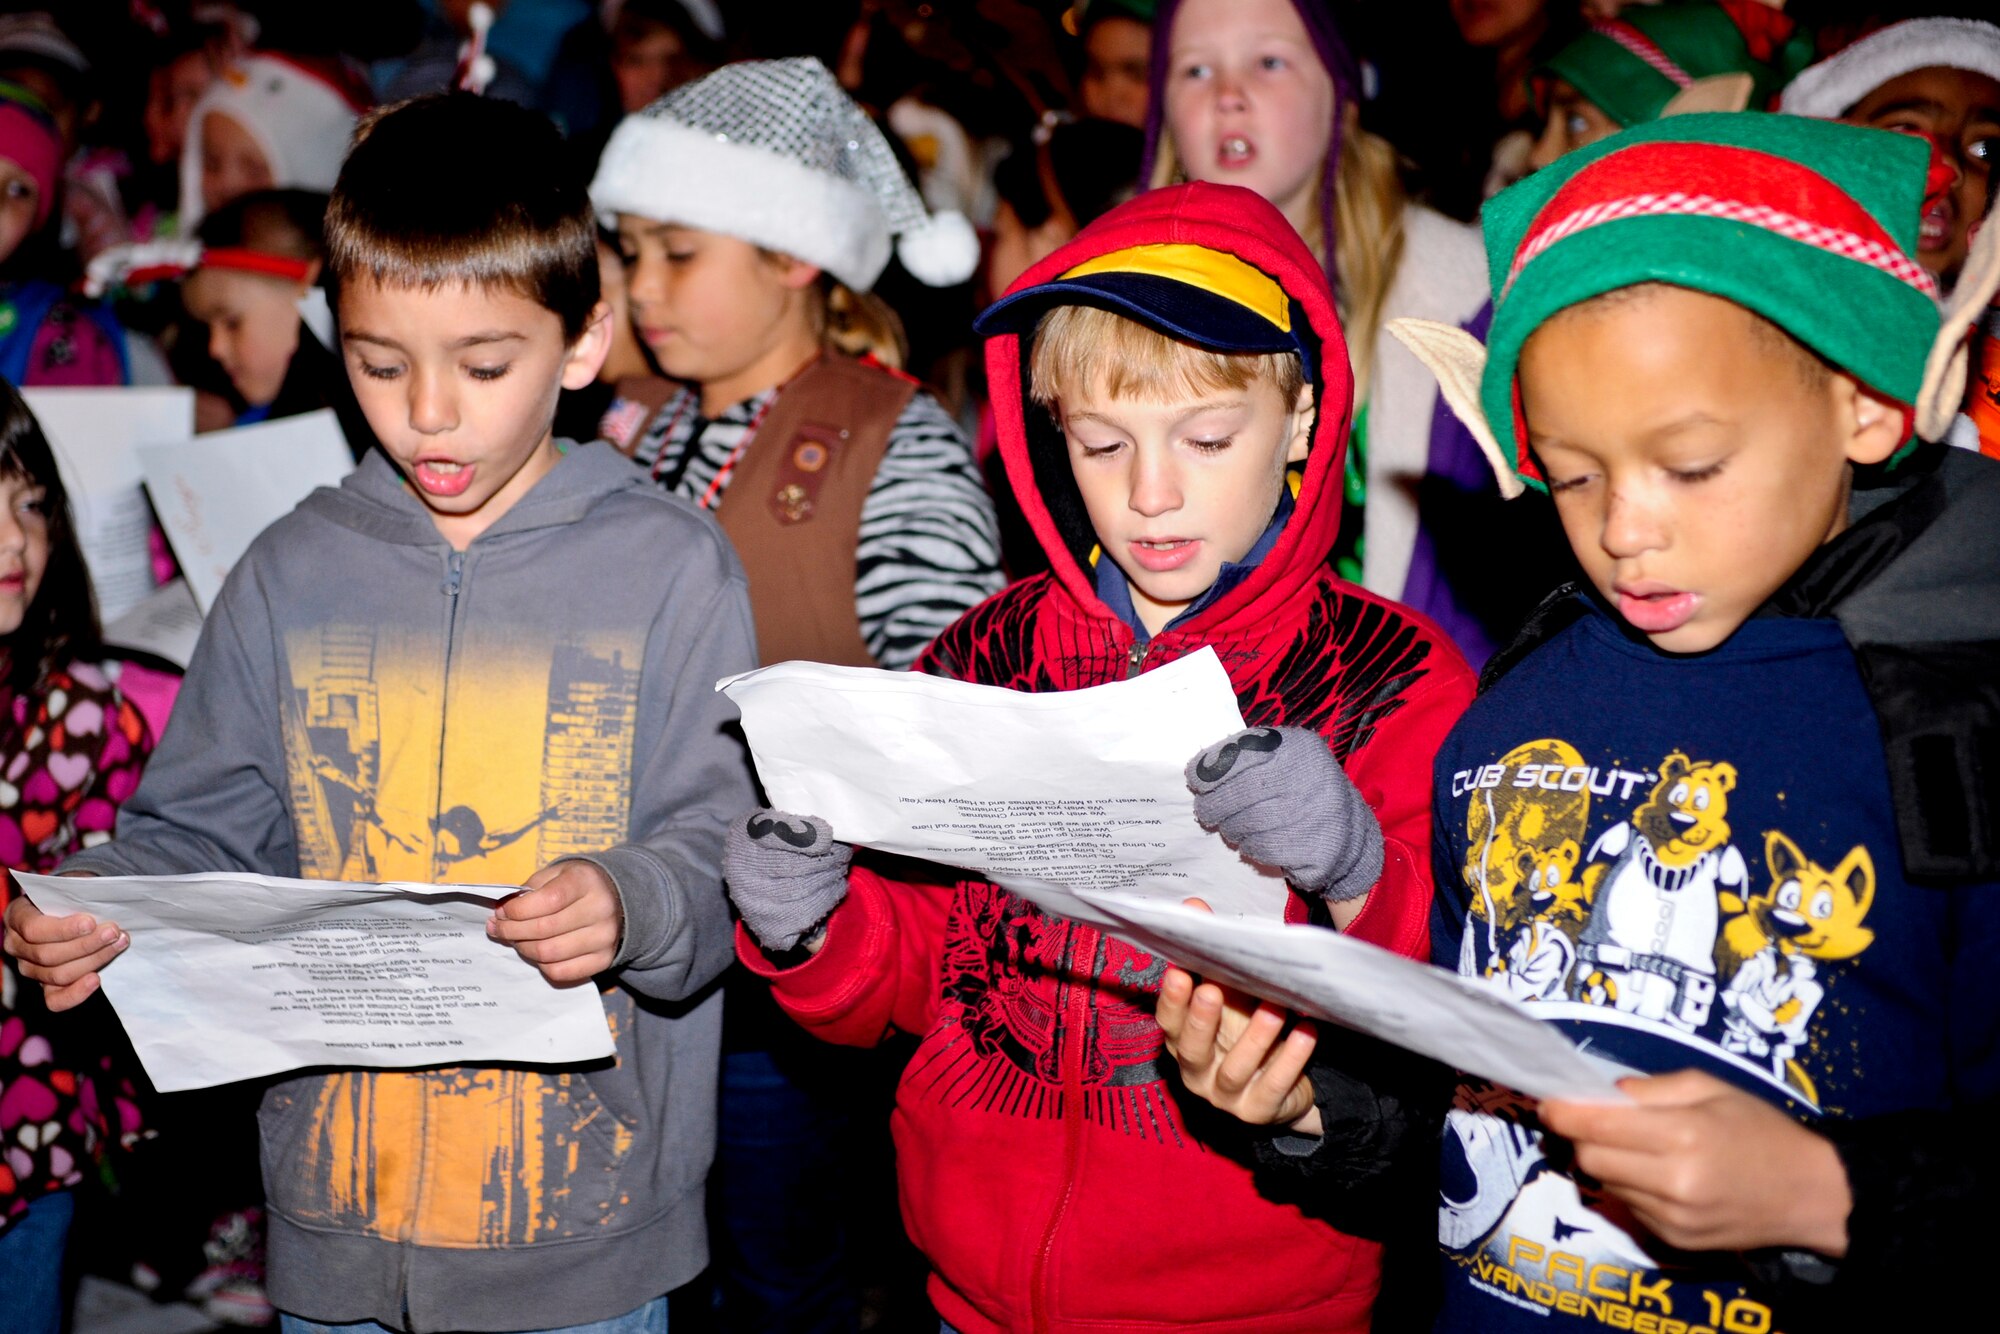 VANDENBERG AIR FORCE BASE, Calif. – Vandenberg Girl and Boy Scouts sing carols for Team V during Vandenberg’s annual Tree Lighting Ceremony in front of building 11777 here Dec. 9, 2013. The event included caroling, hot chocolate, the lighting of the tree and a visit from Santa Claus.  (U.S. Air Force photo/ Airman 1st Class Yvonne Morales)